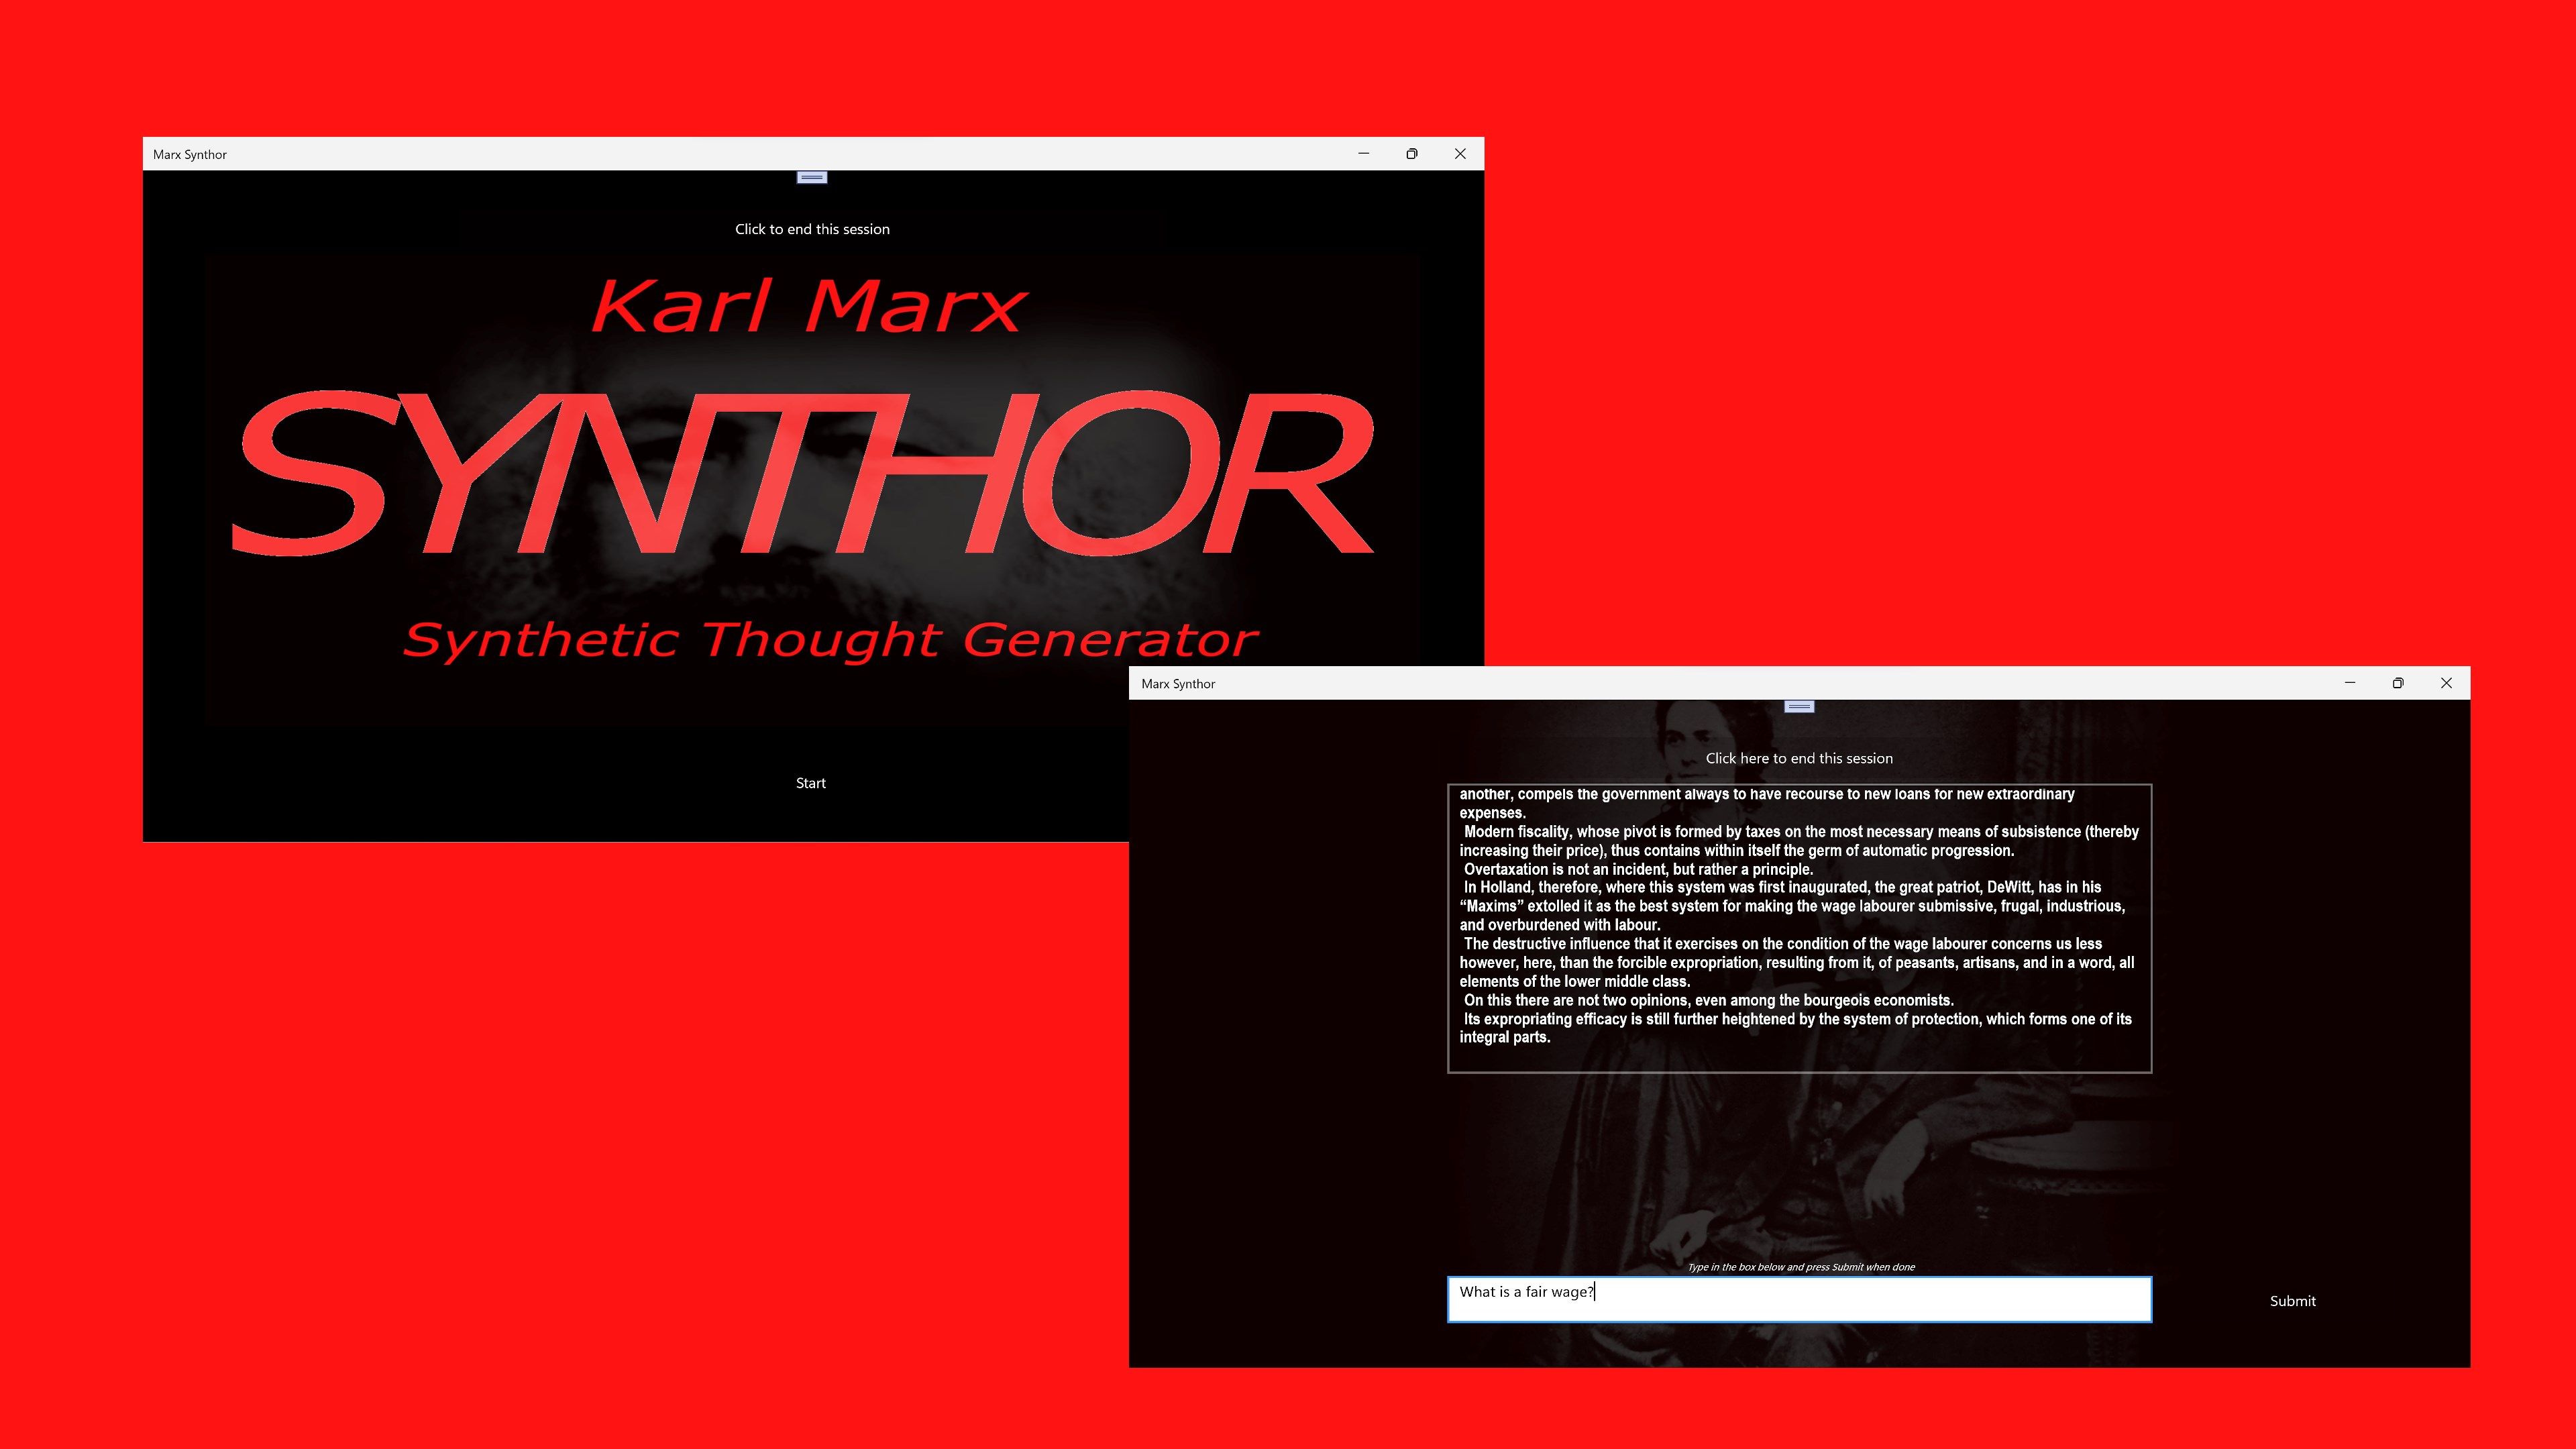 The Karl Marx Synthor!